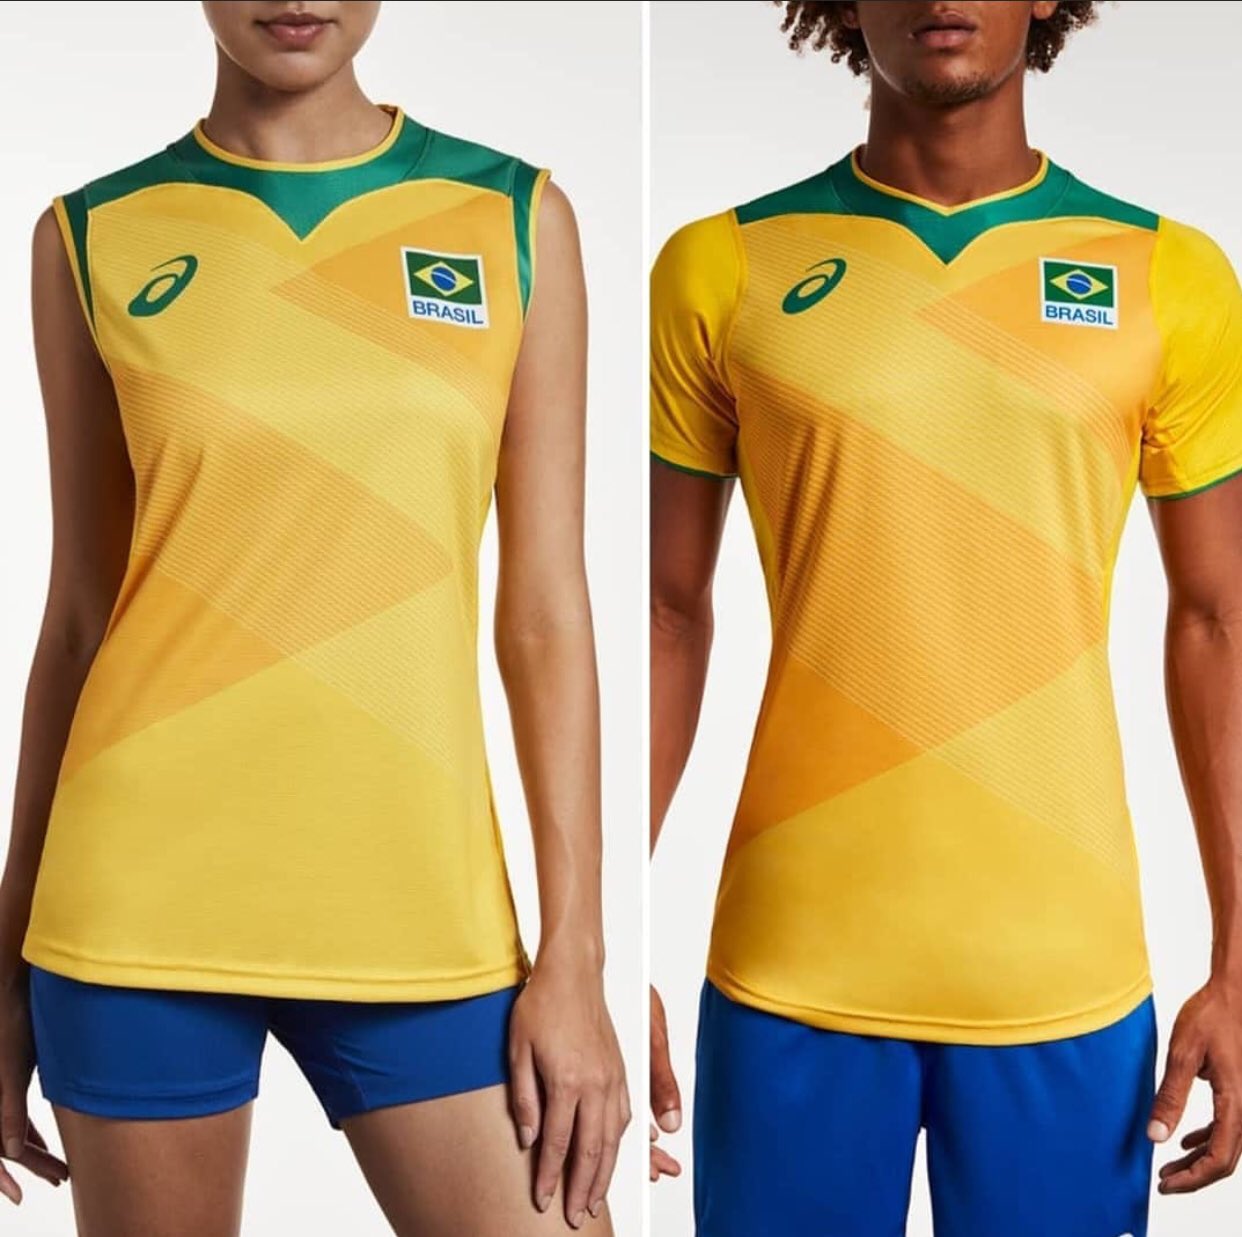 Volleytrails🏐 on X: The official uniform of Brazil's volleyball